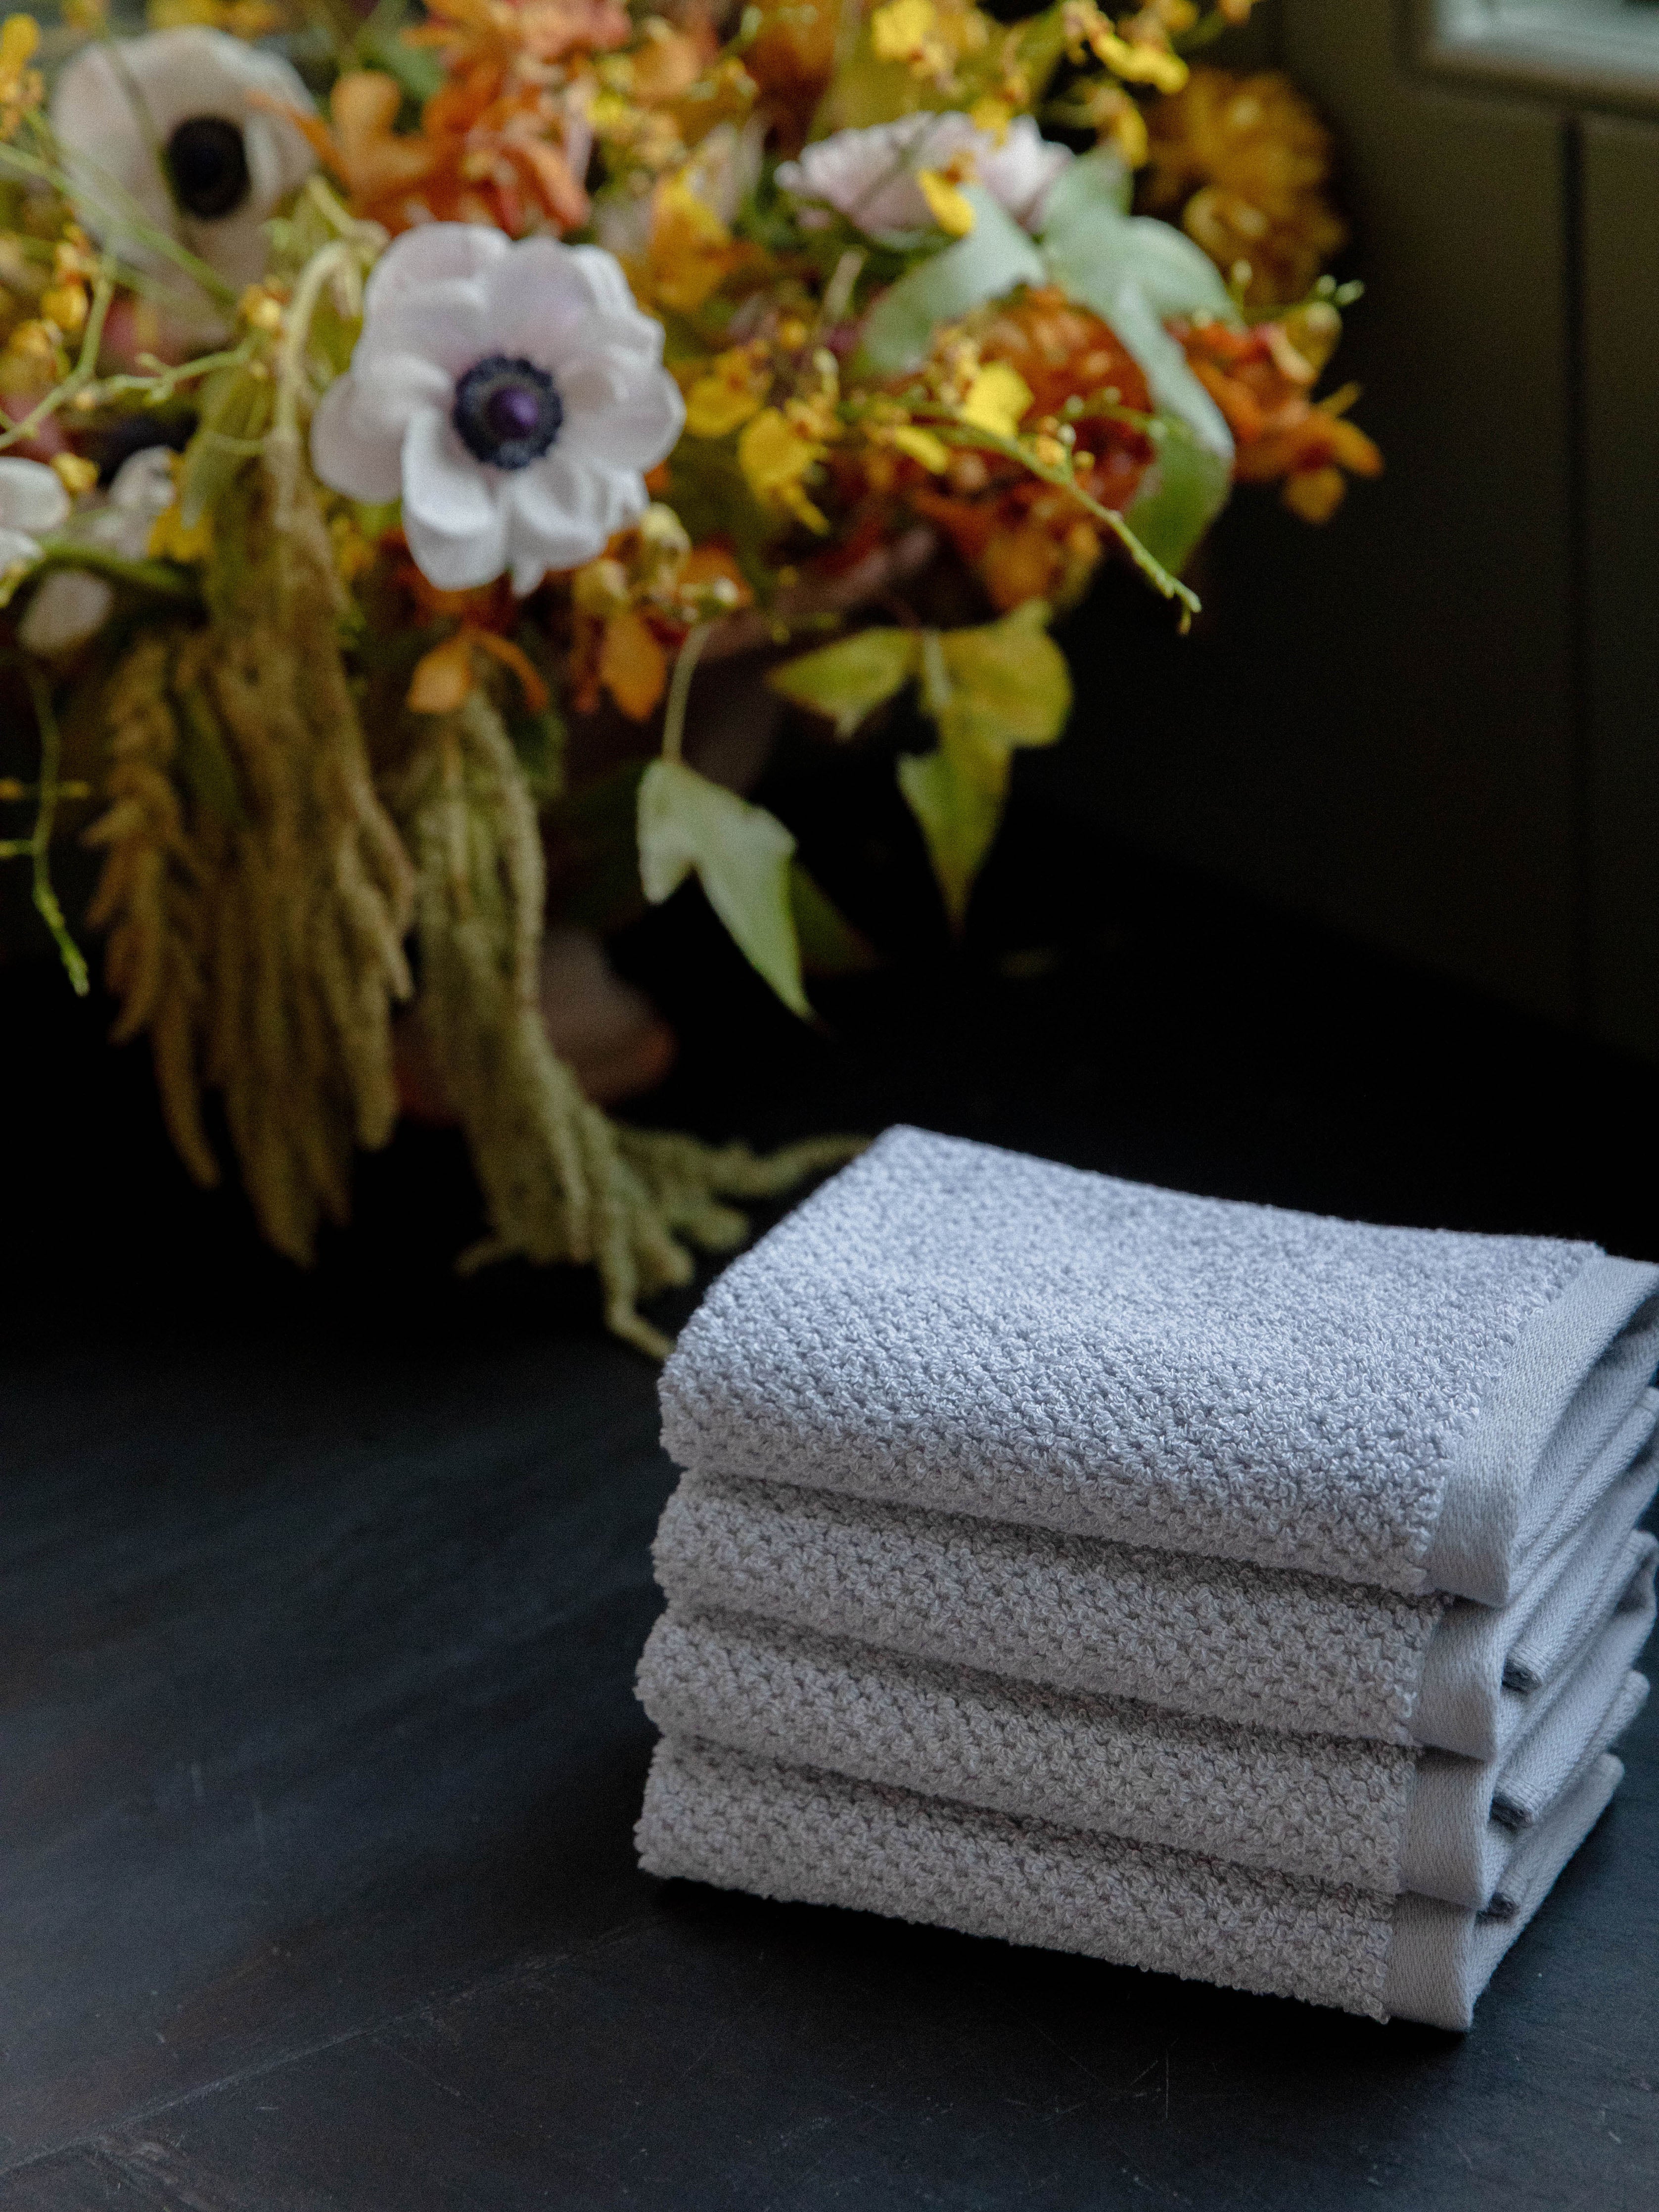 Nantucket Wash Cloths in the color Heathered Harbor Mist. Photo of Nantucket Wash Cloths taken with the Wash Cloths resting on a countertop in a bathroom. |Color: Heathered Harbor Mist